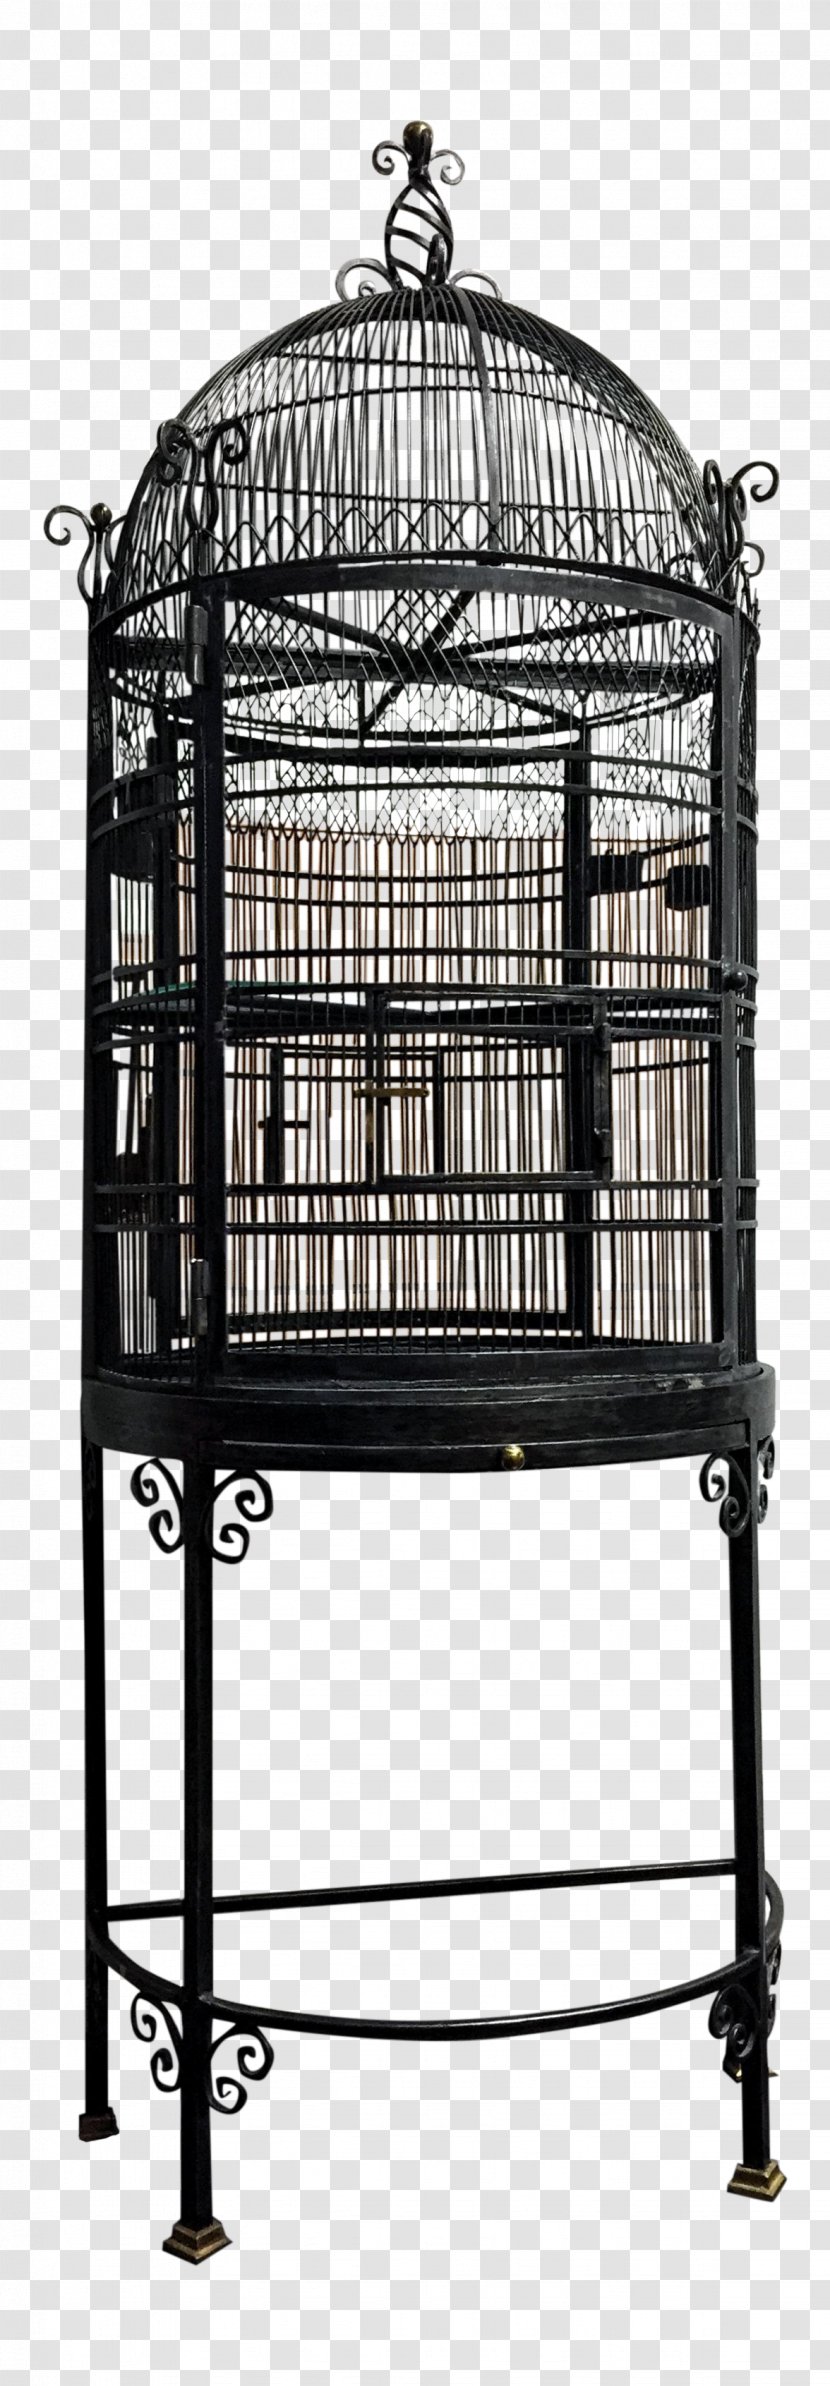 Birdcage House - Cage - By Octopus Artis Transparent PNG